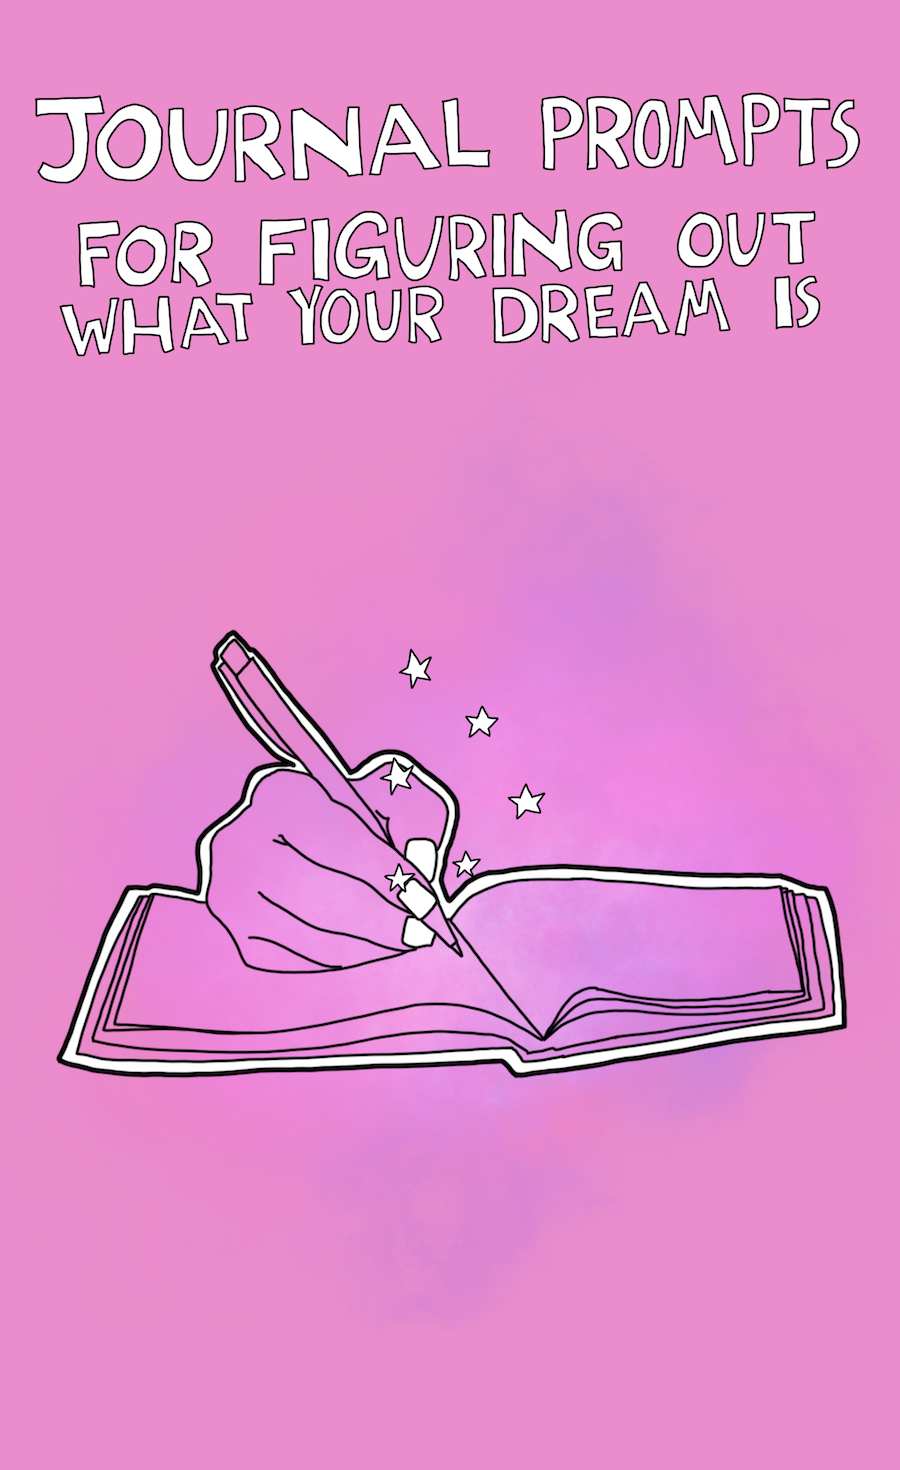 Journal Prompts for Finding your Dream